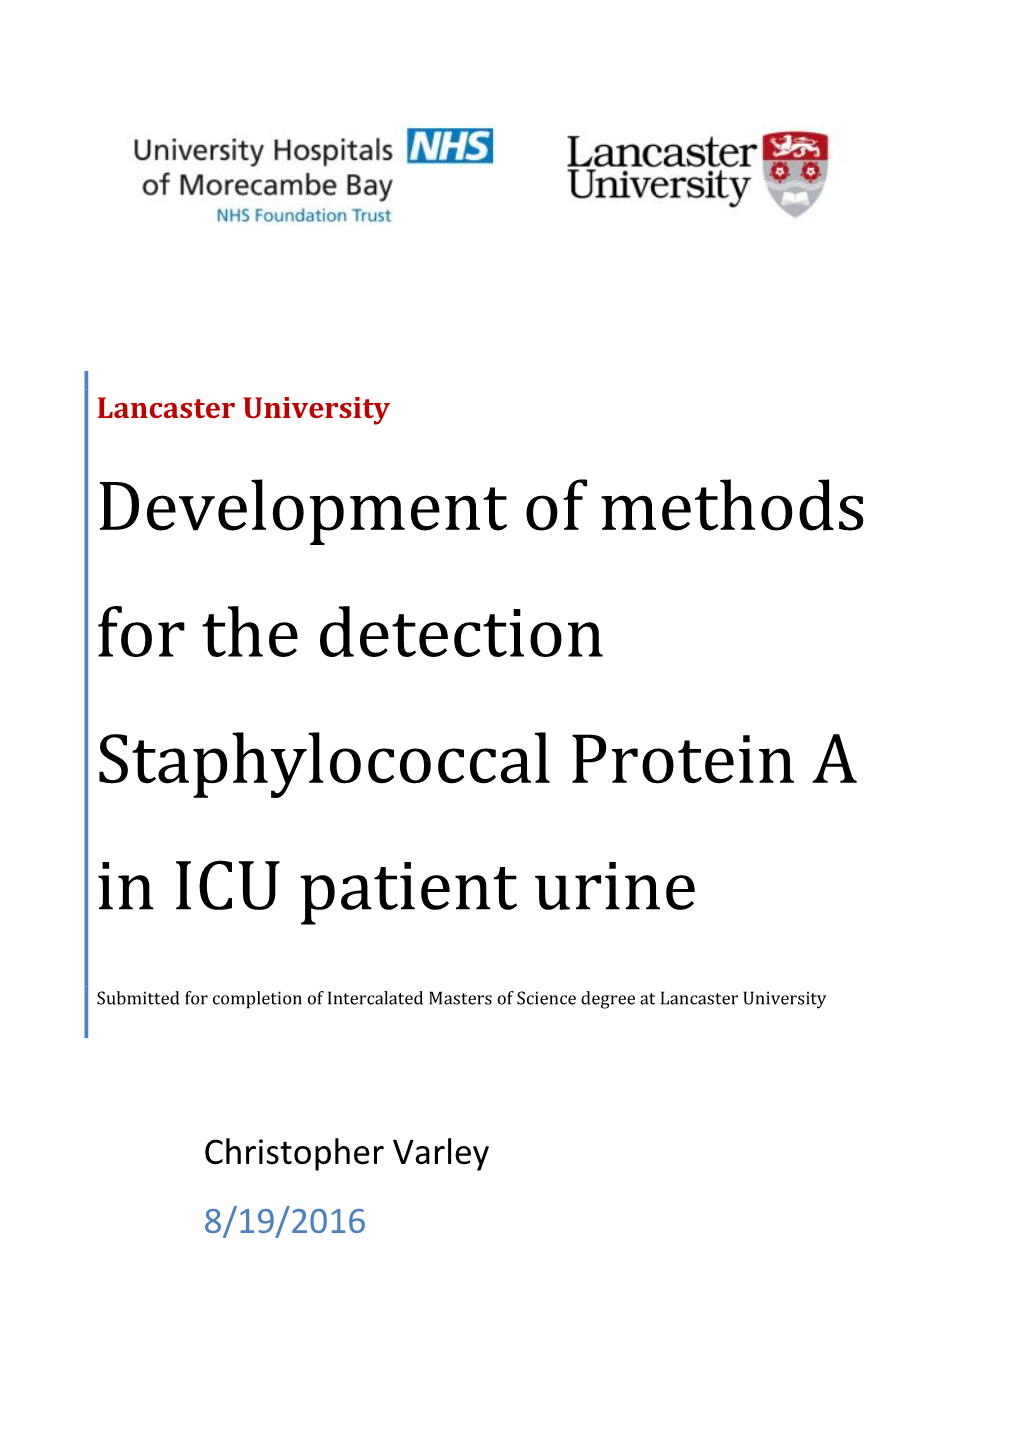 Development of Methods for the Detection Staphylococcal Protein a in ICU Patient Urine